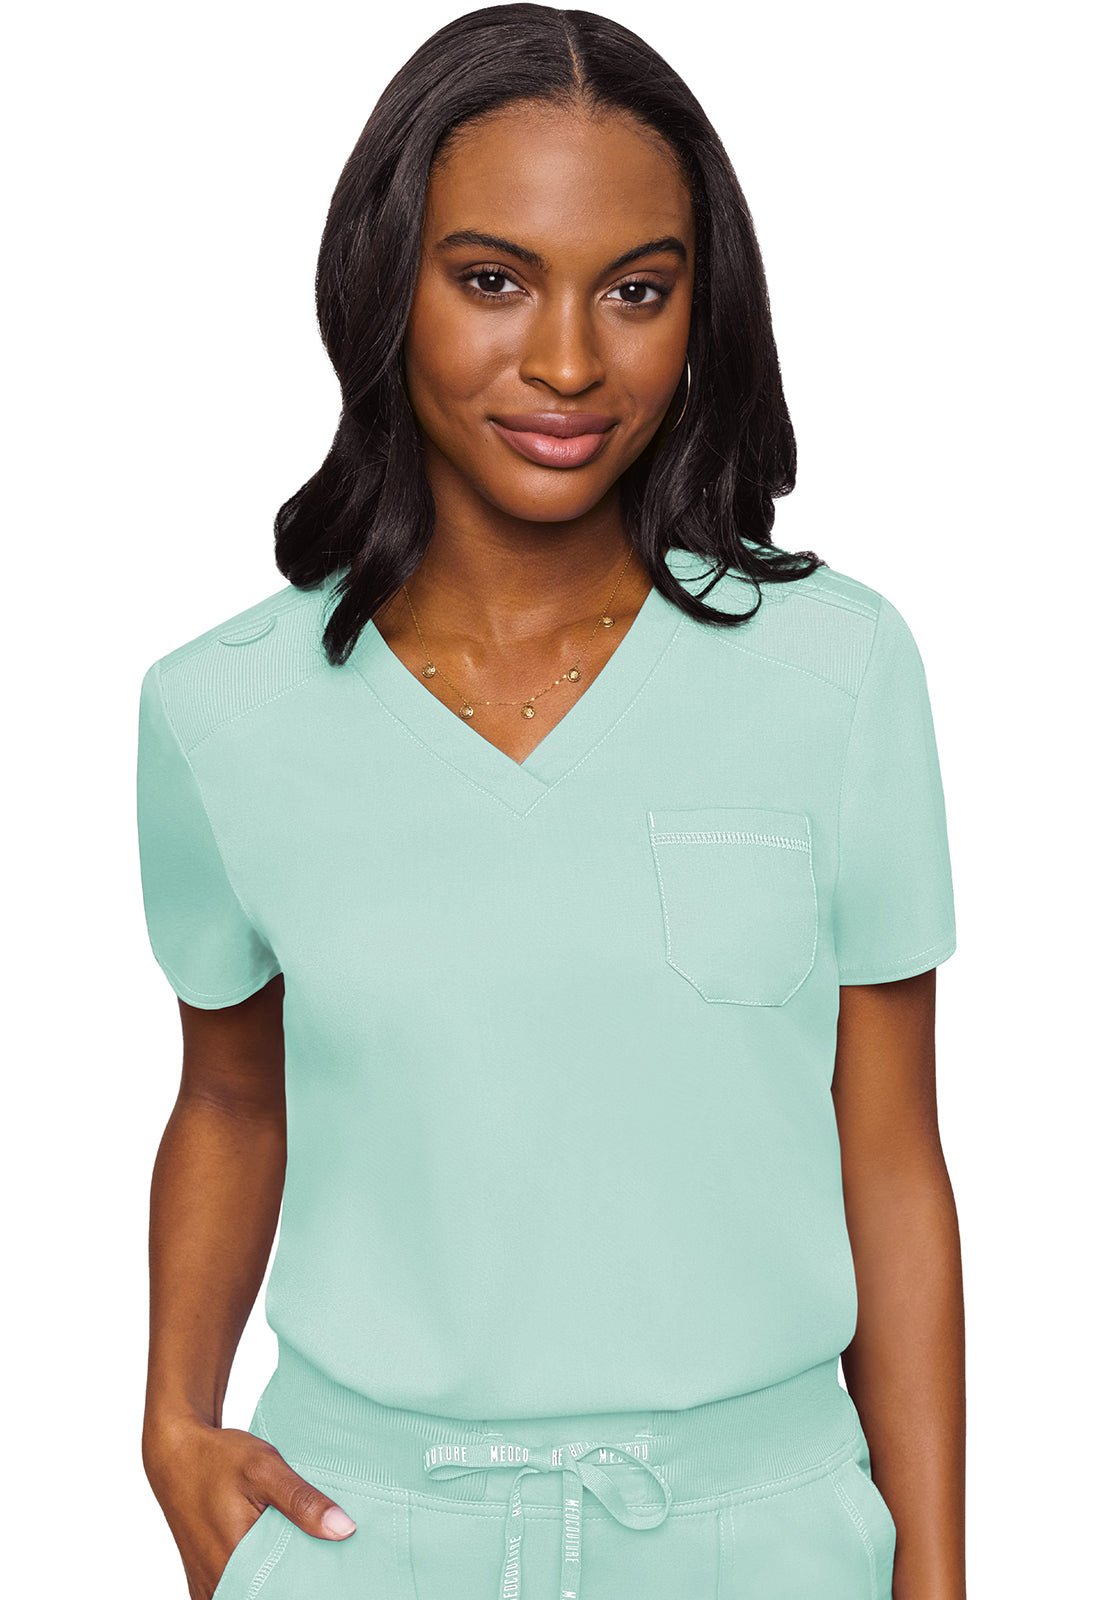 Med Couture Touch V Neck Scrub Top MC7448 in Eggplant, Pink, Lilac, Olive, Sea Mist, Slate, Teal - Scrubs Select